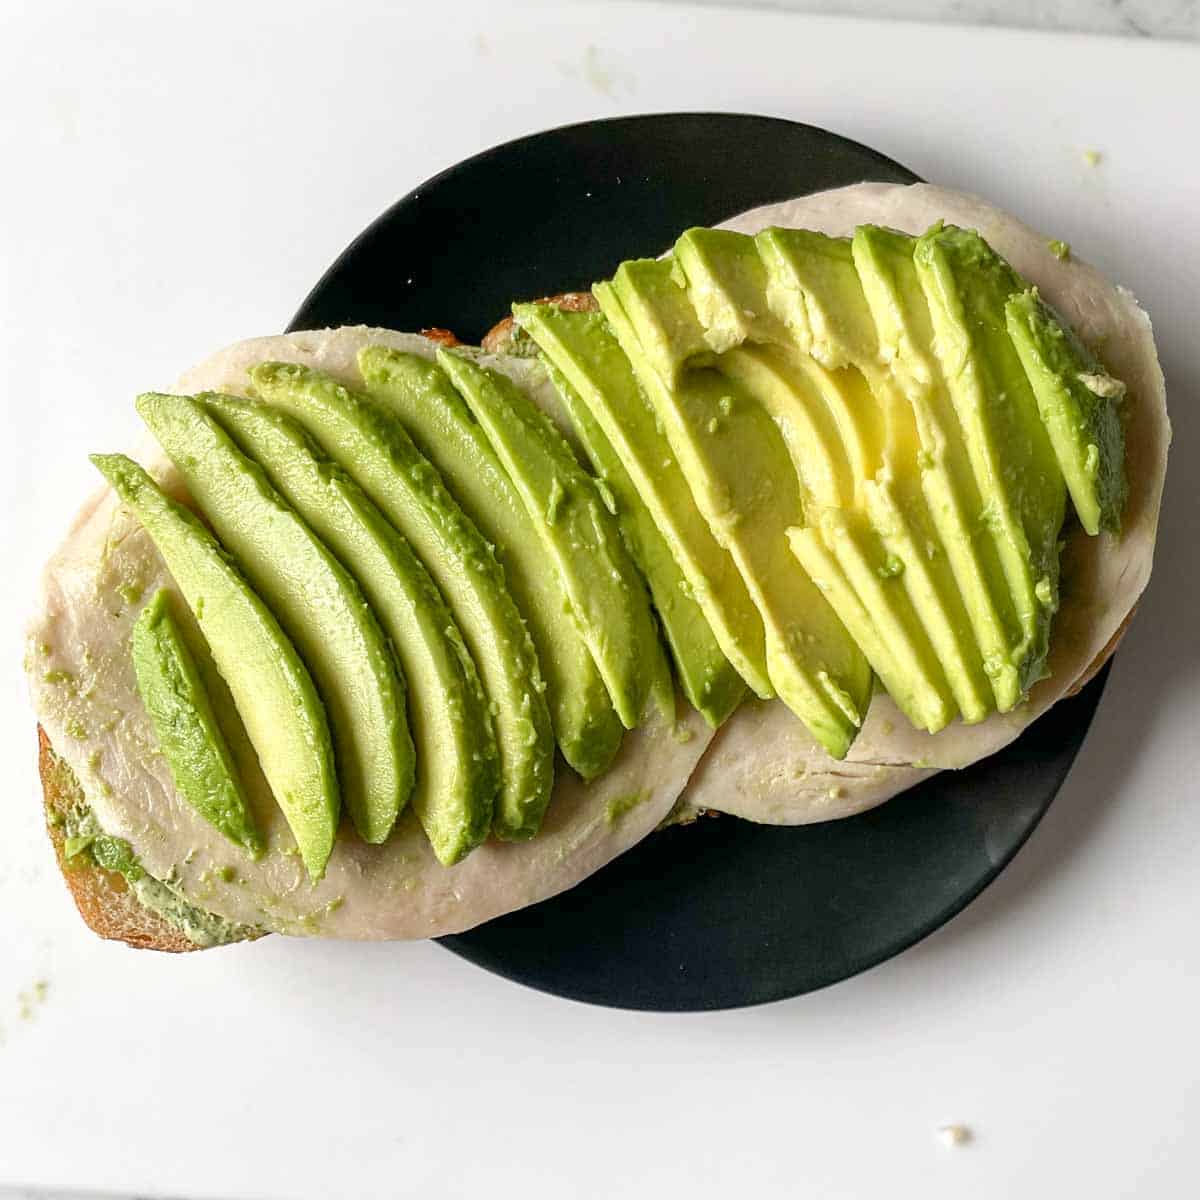 Avocado is added to the sandwich.